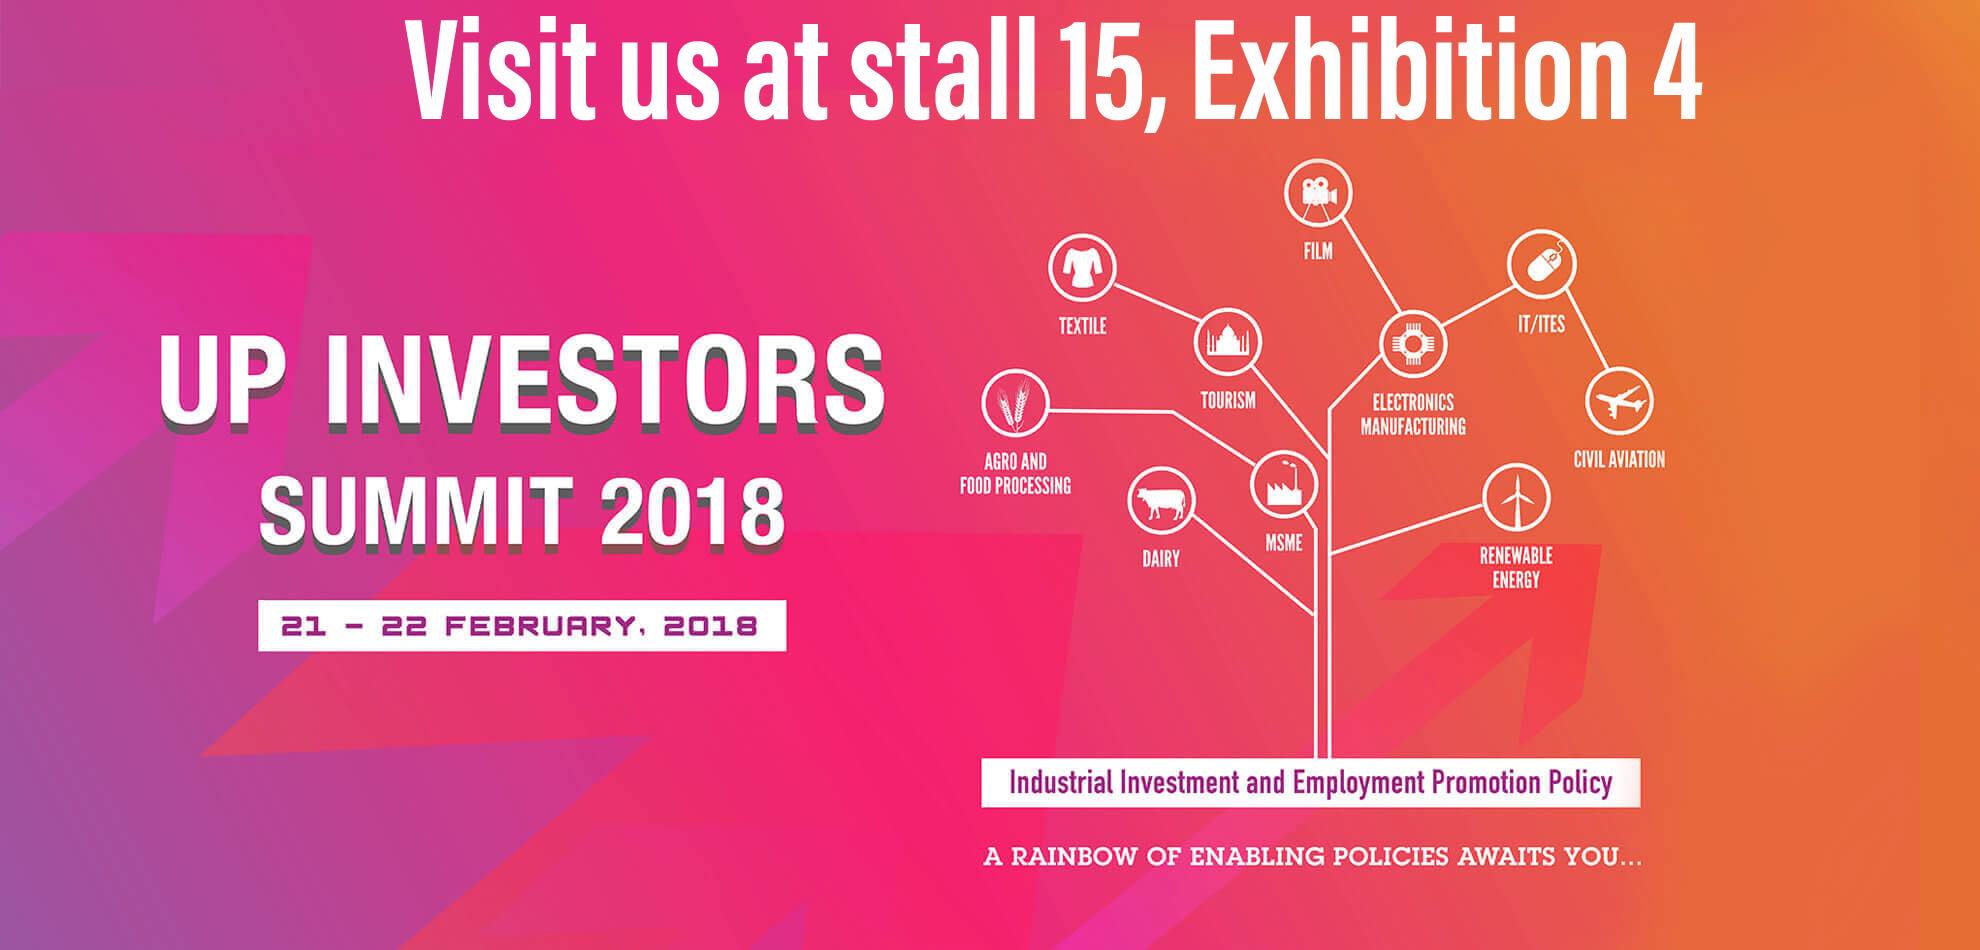 Abhitech Participated in UP Investors Summit 2018 at Stall 15, Exhibition 4